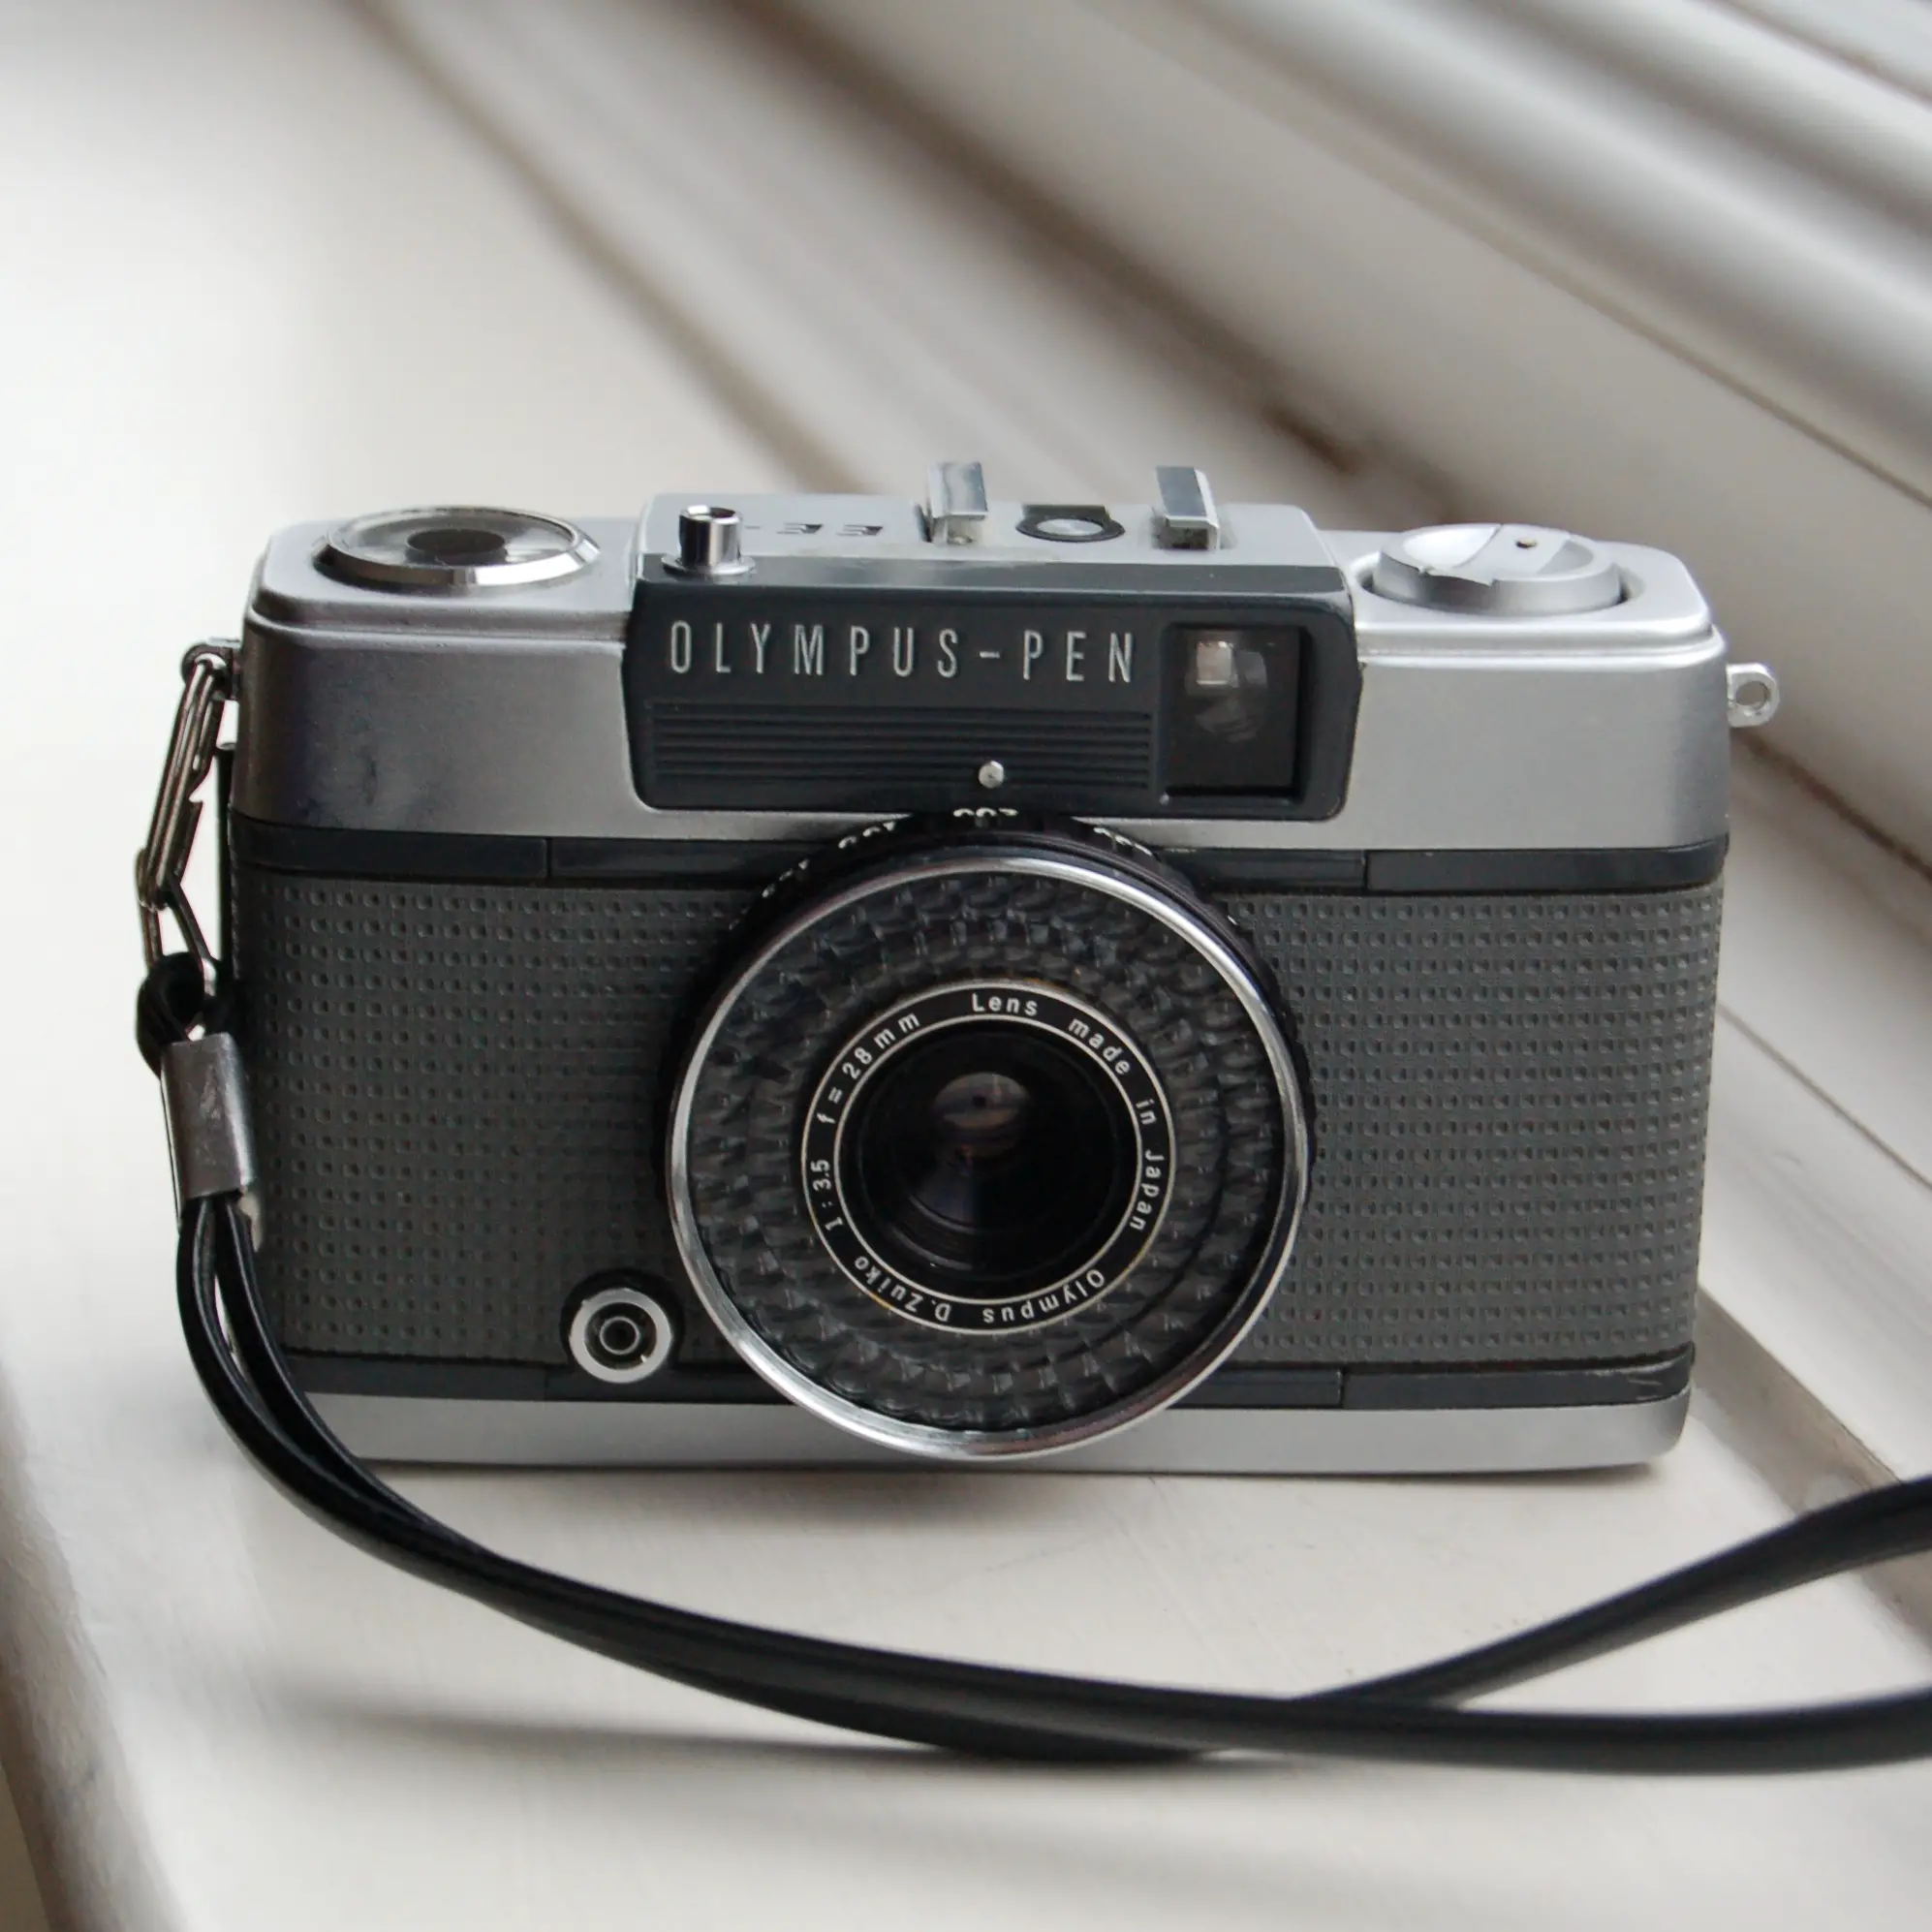 Olympus PEN EE-2 Review - Fixed Perfection? - by Alan Duncan - 35mmc